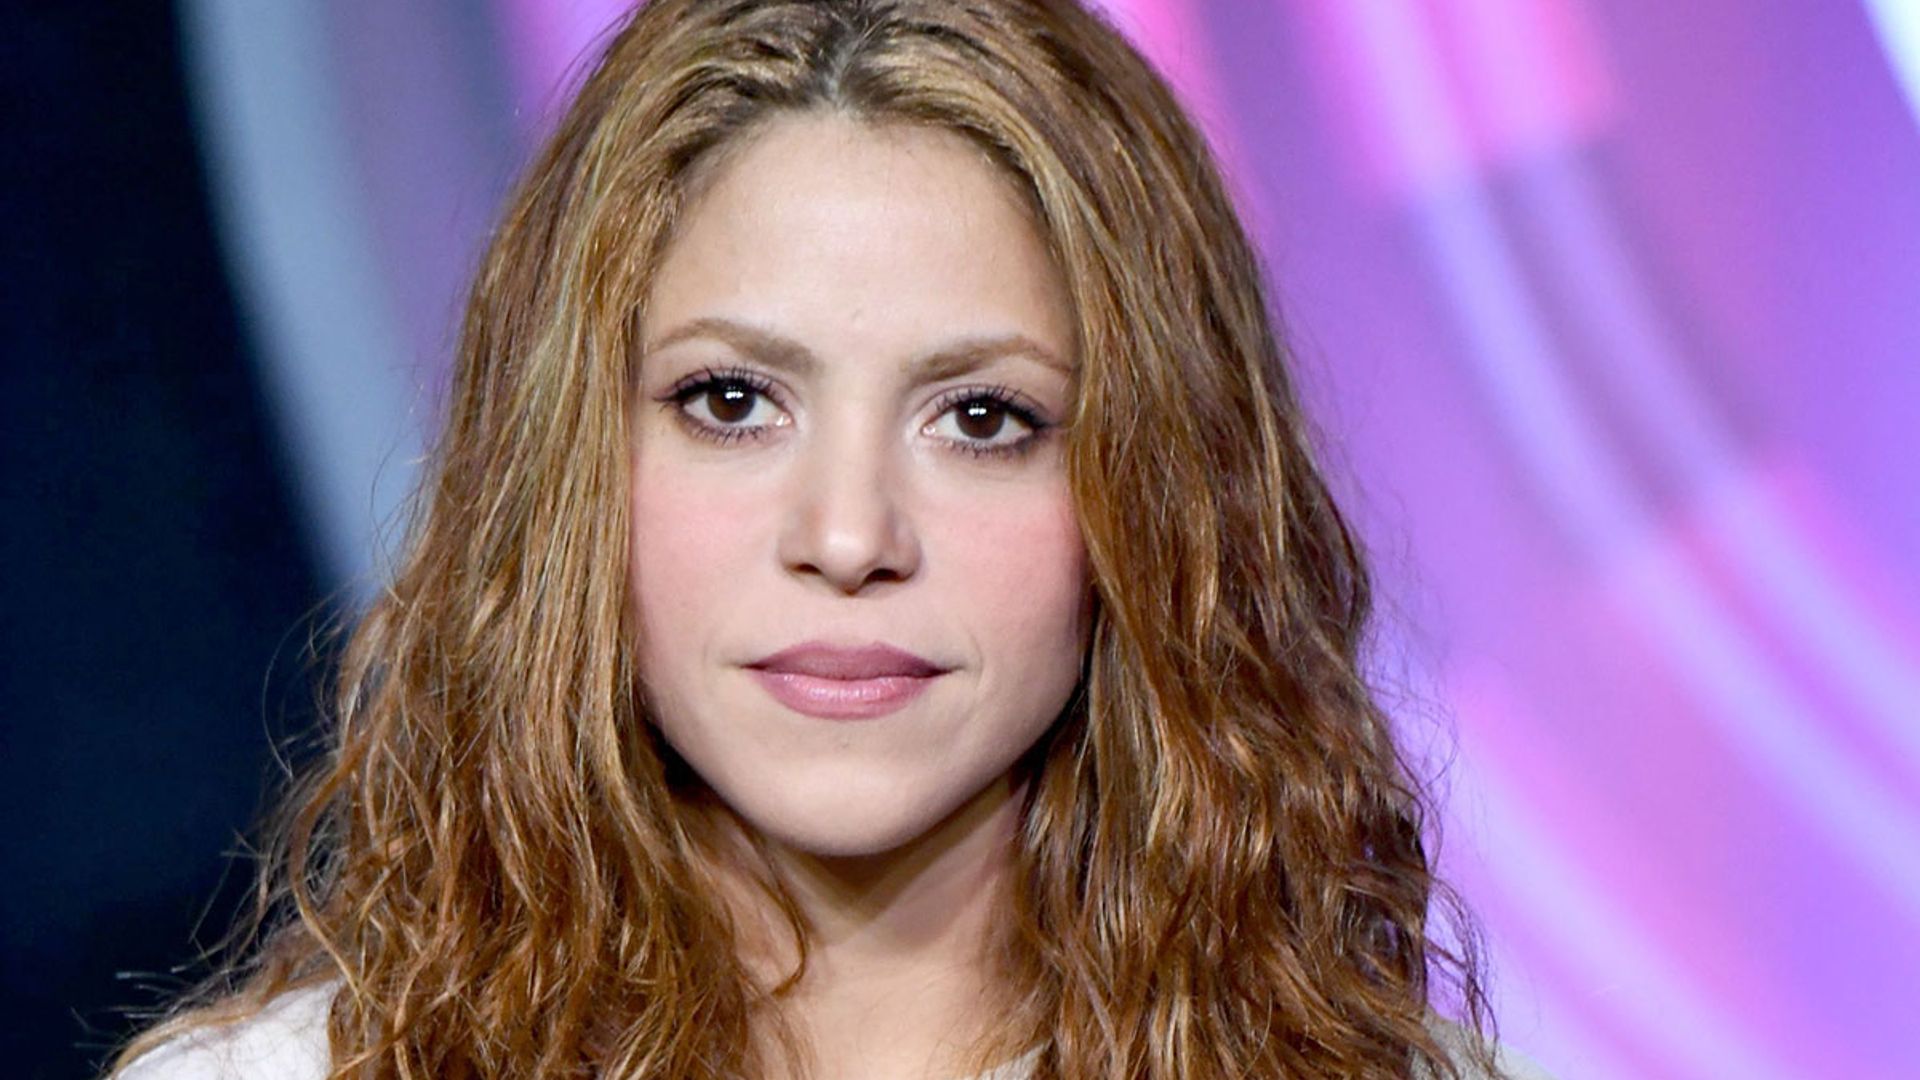 How Shakira dealt with 'unbearable' health diagnosis that left her bedbound